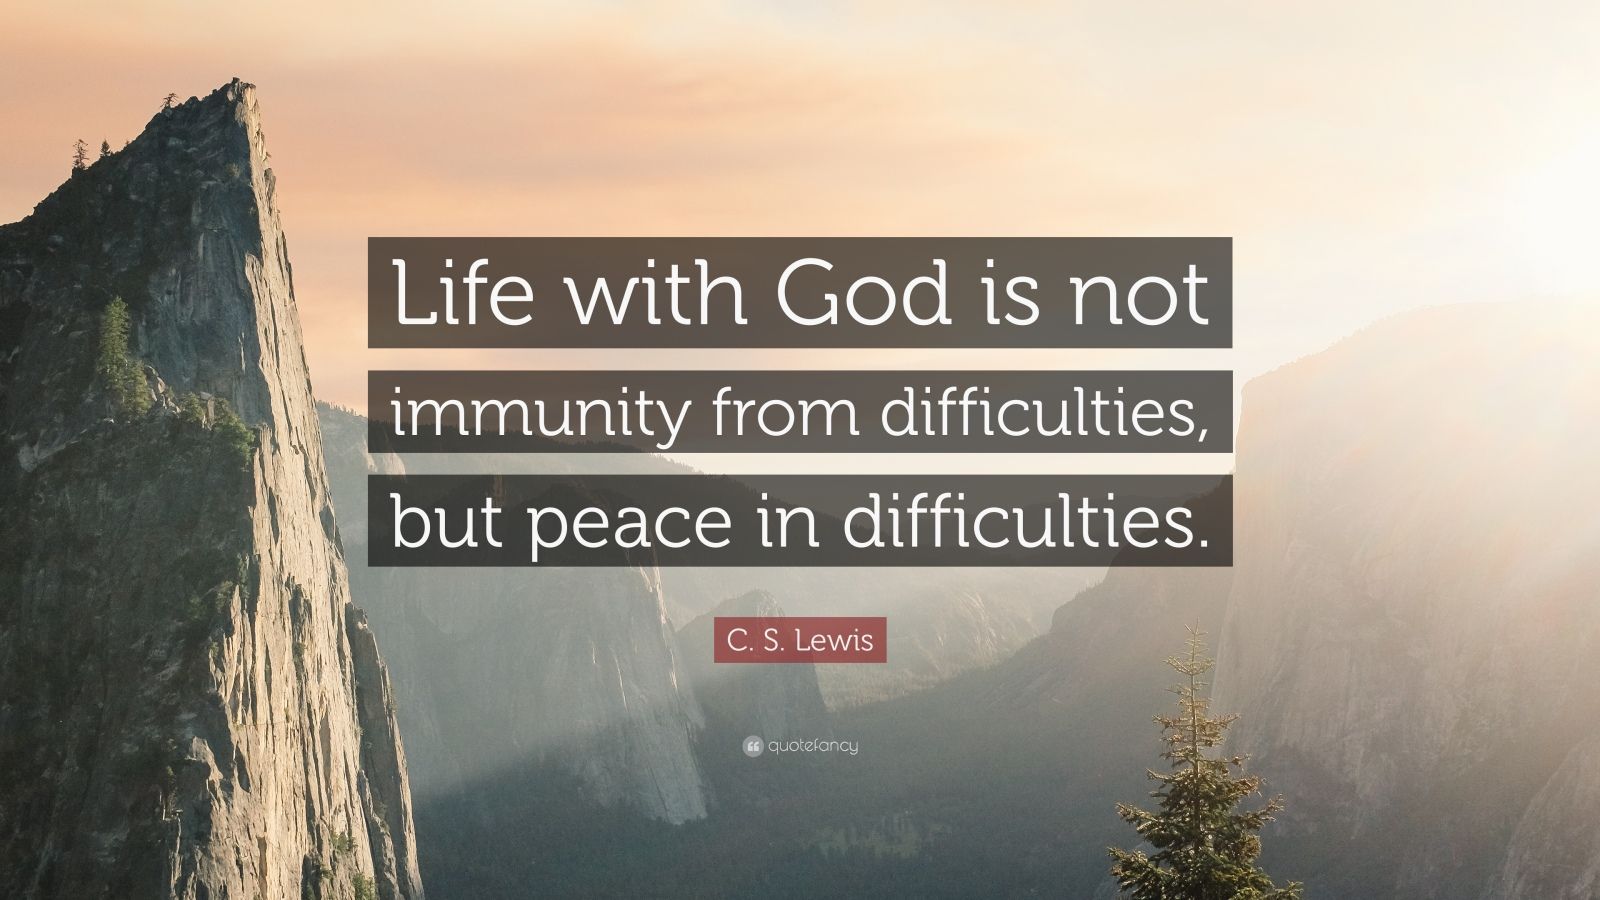 C. S. Lewis Quote: “Life with God is not immunity from difficulties